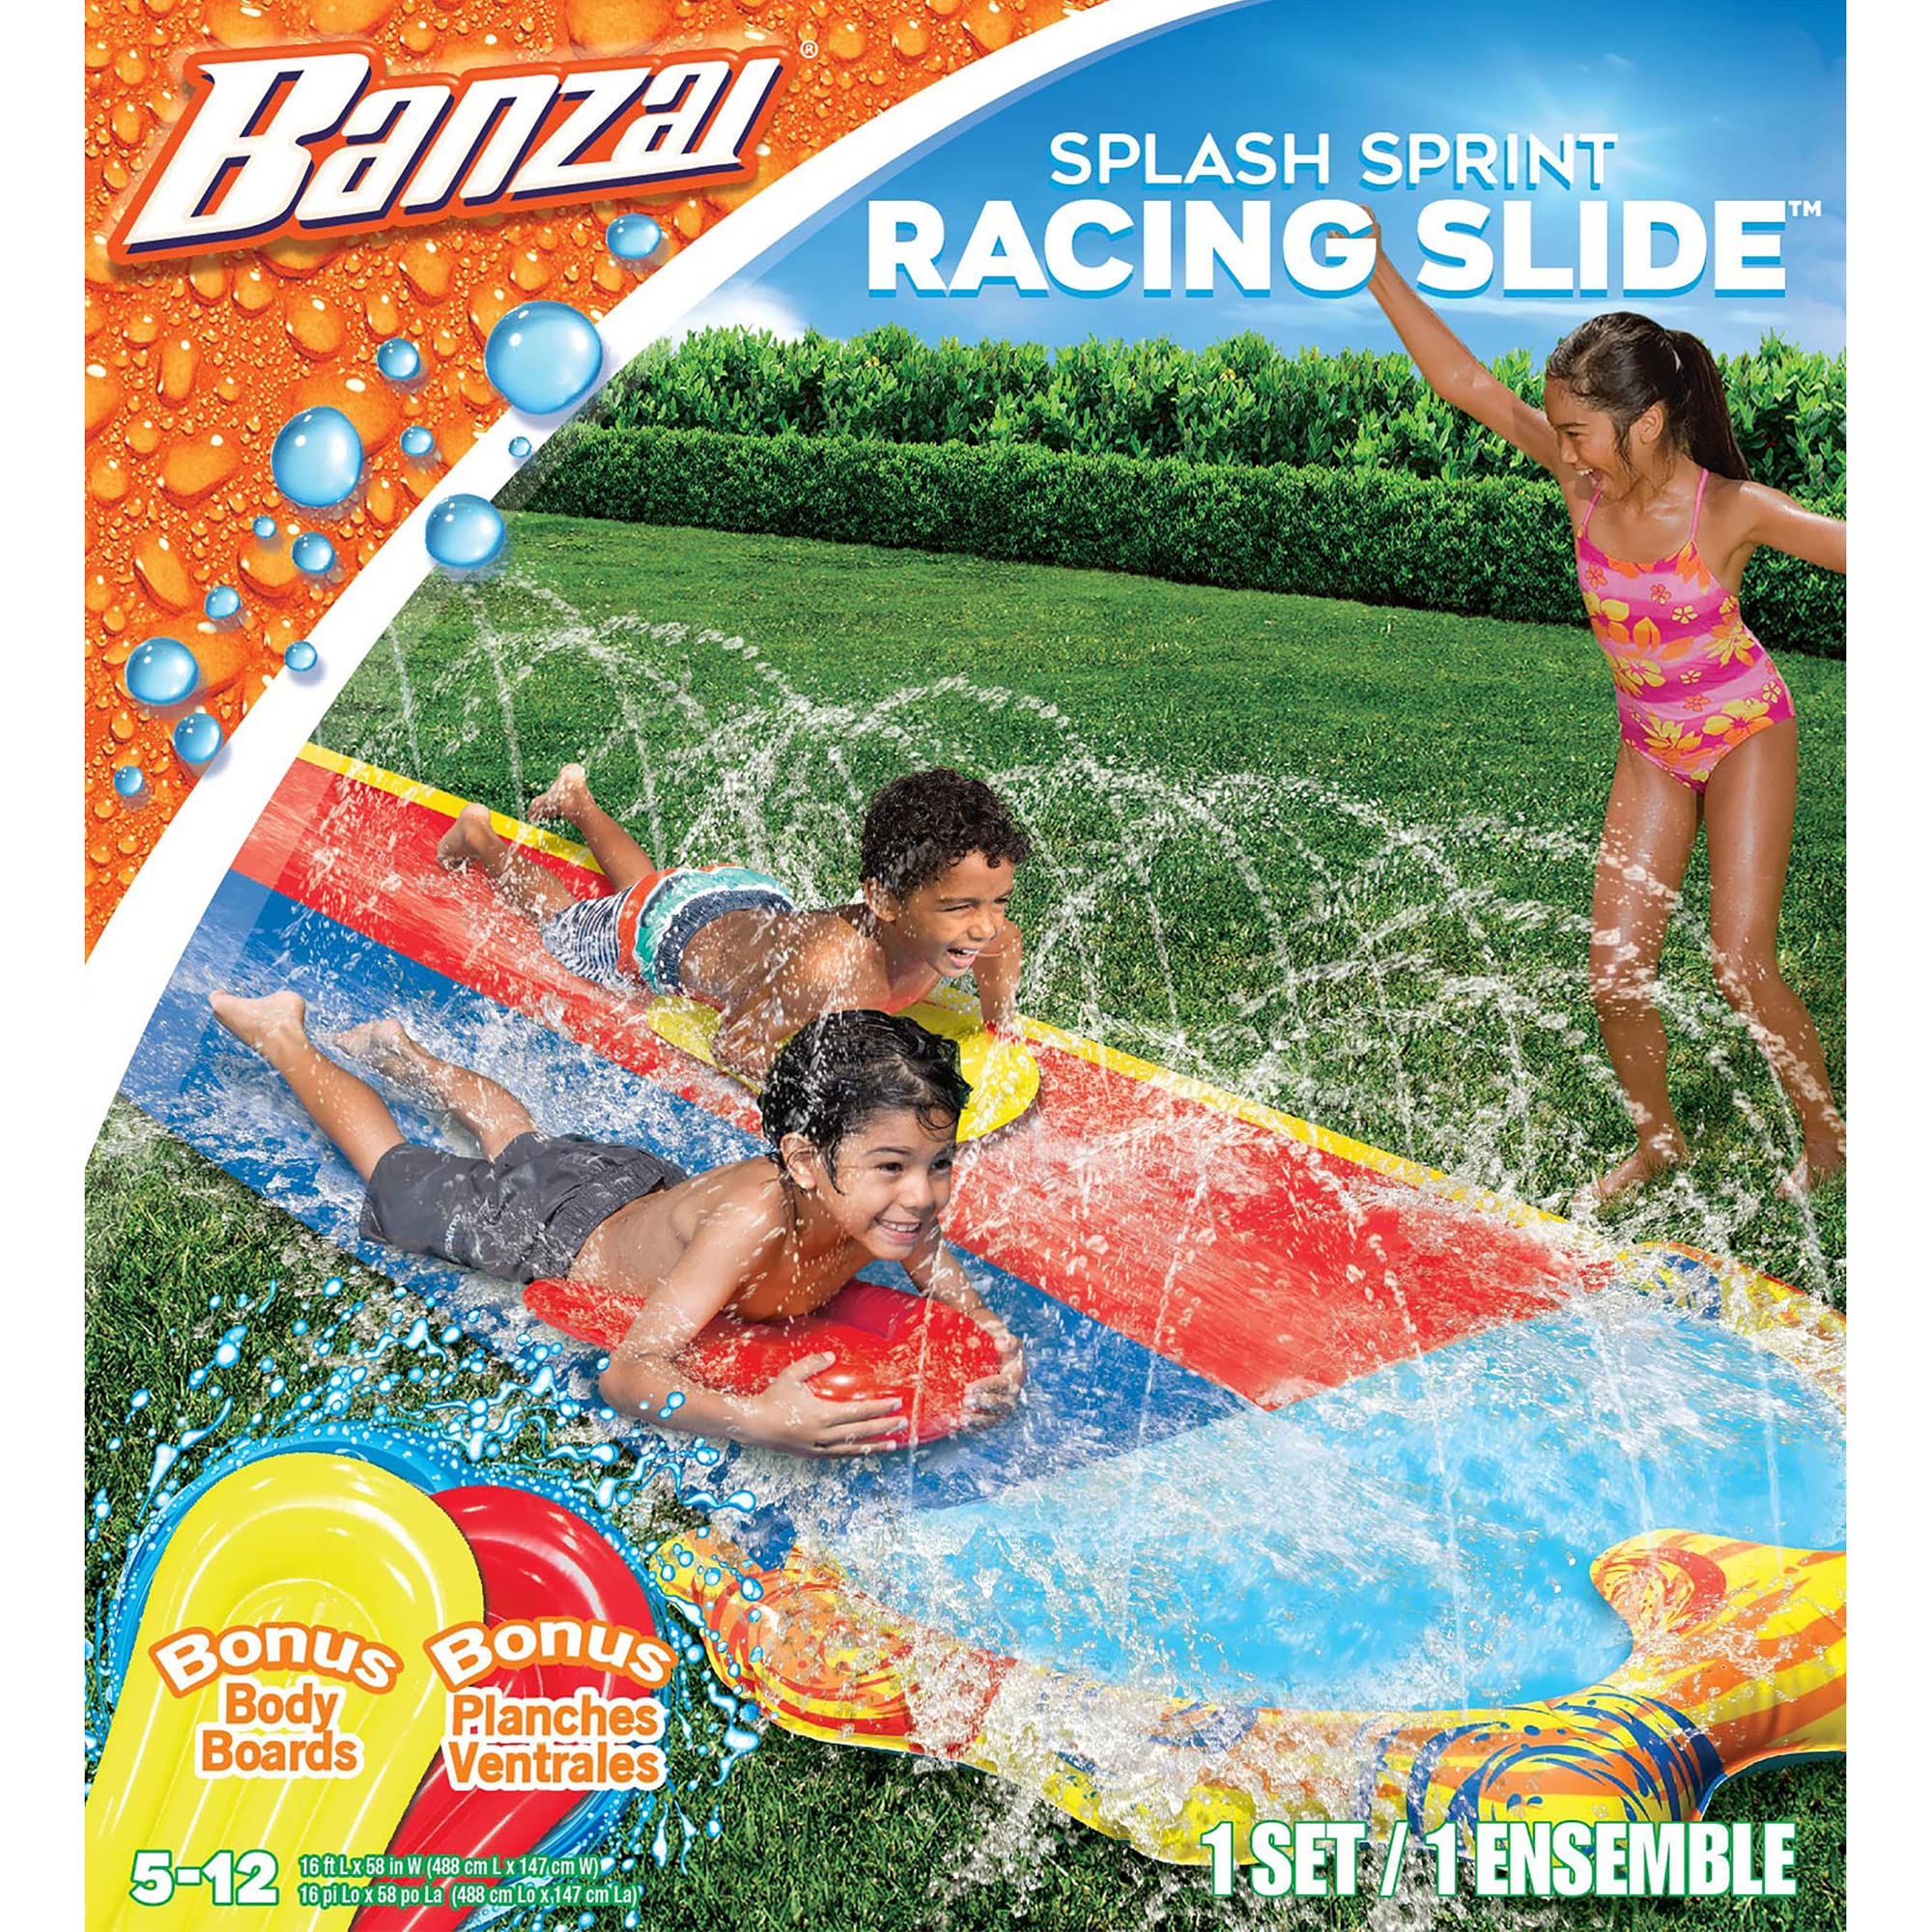 Splash Sprint Racing Slide with 2 Bodyboards $10 + Free Shipping w/ Prime or on $25+